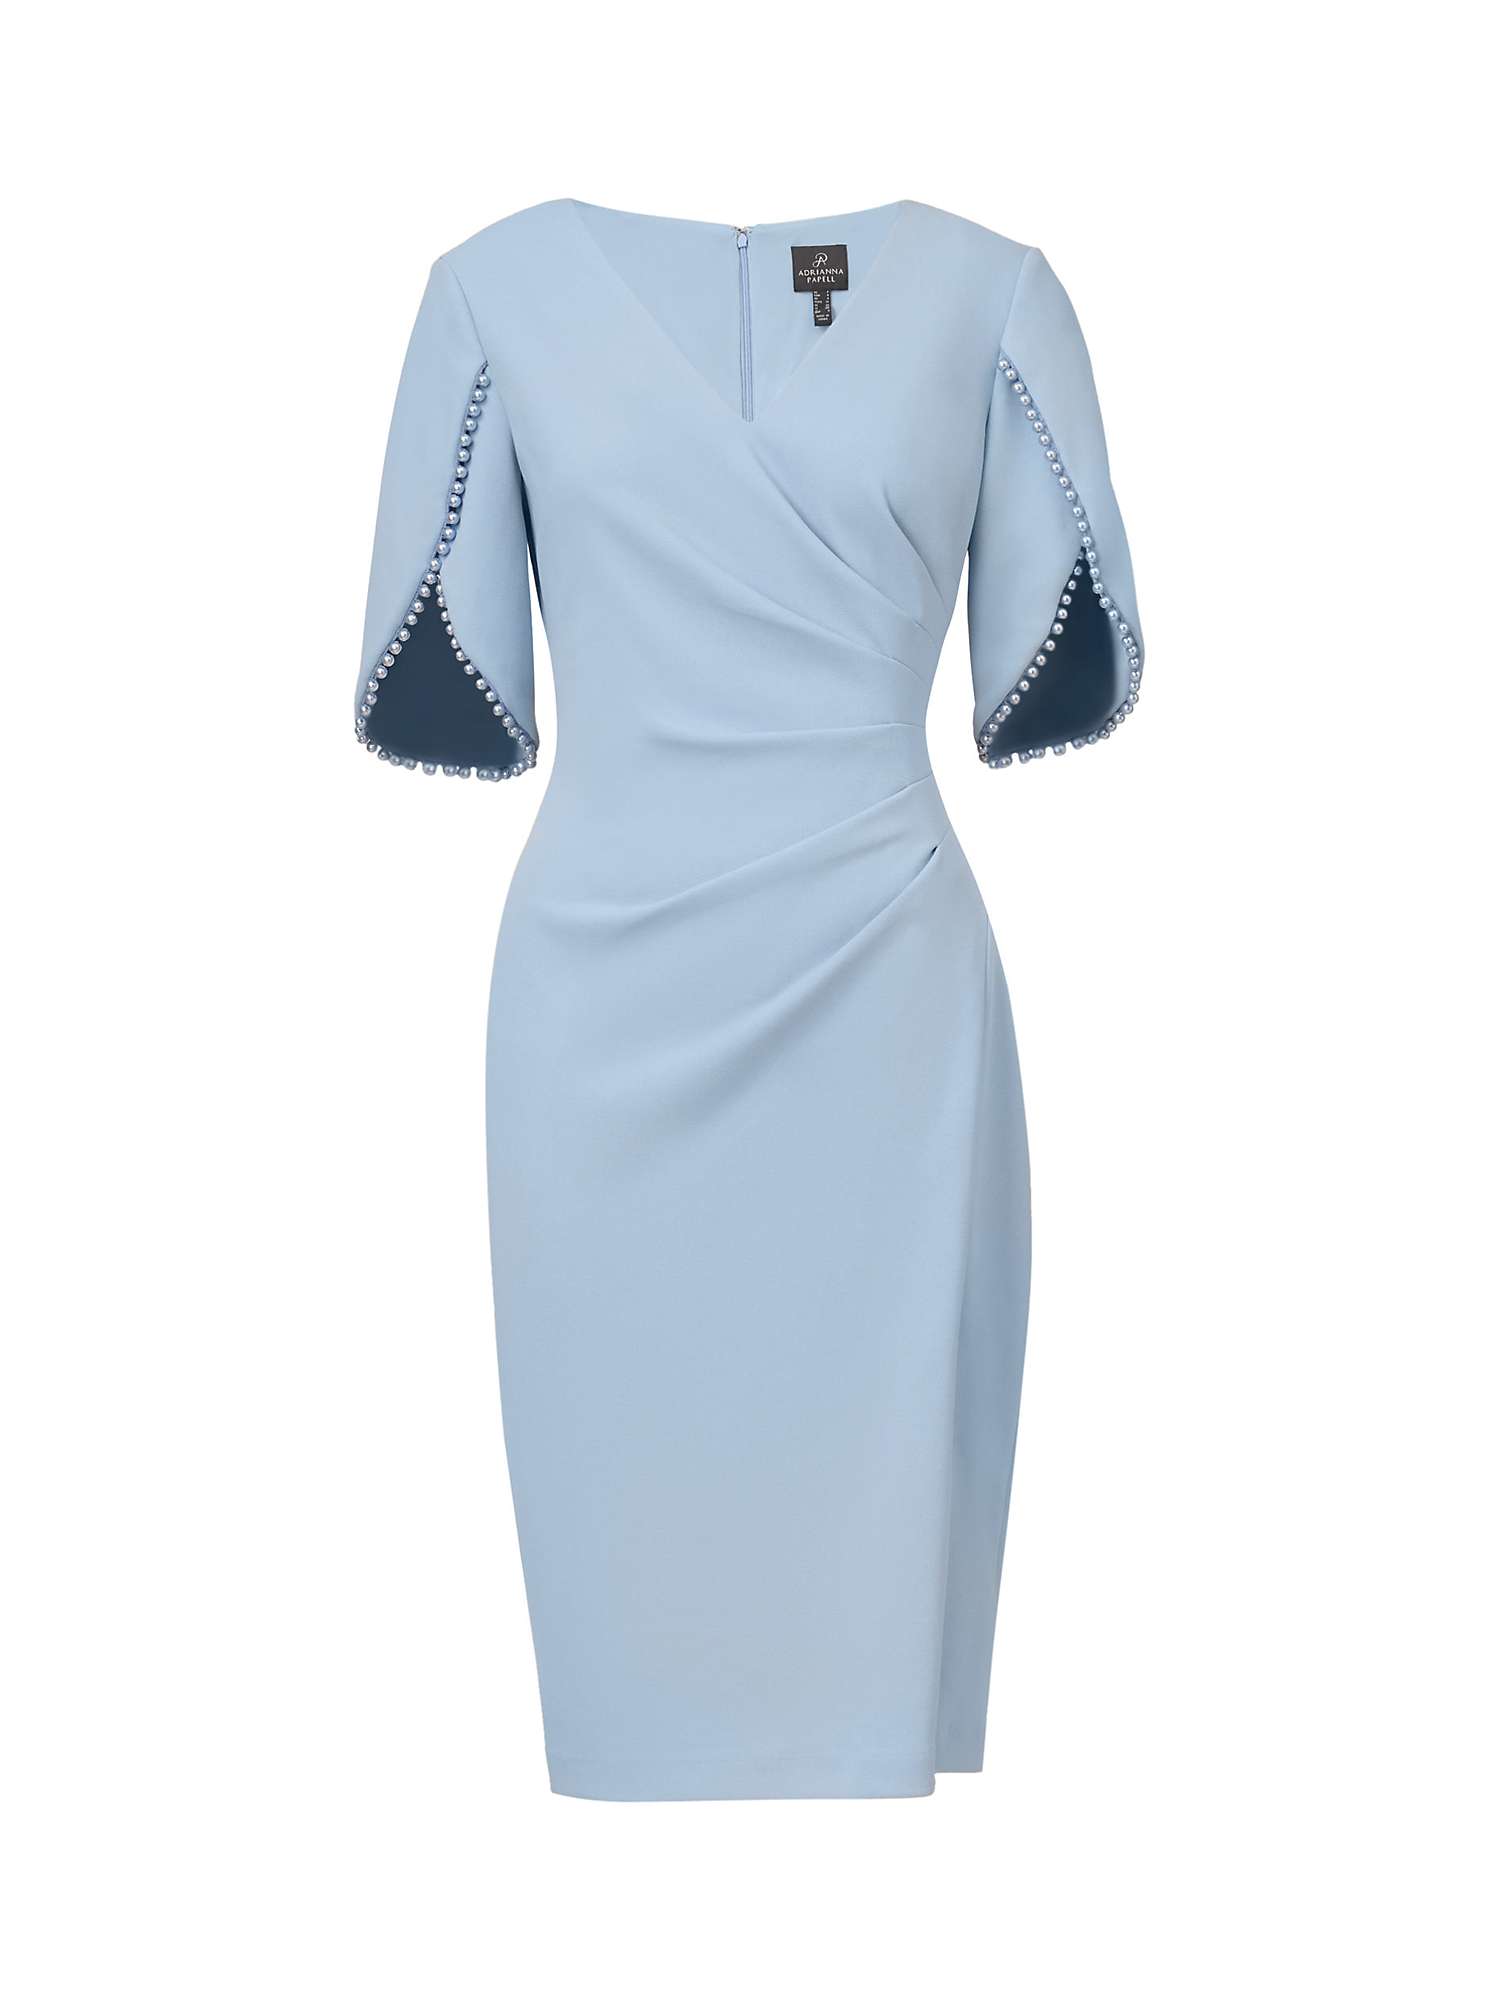 Buy Adrianna Papell Crepe Pearl Trim Dress Online at johnlewis.com